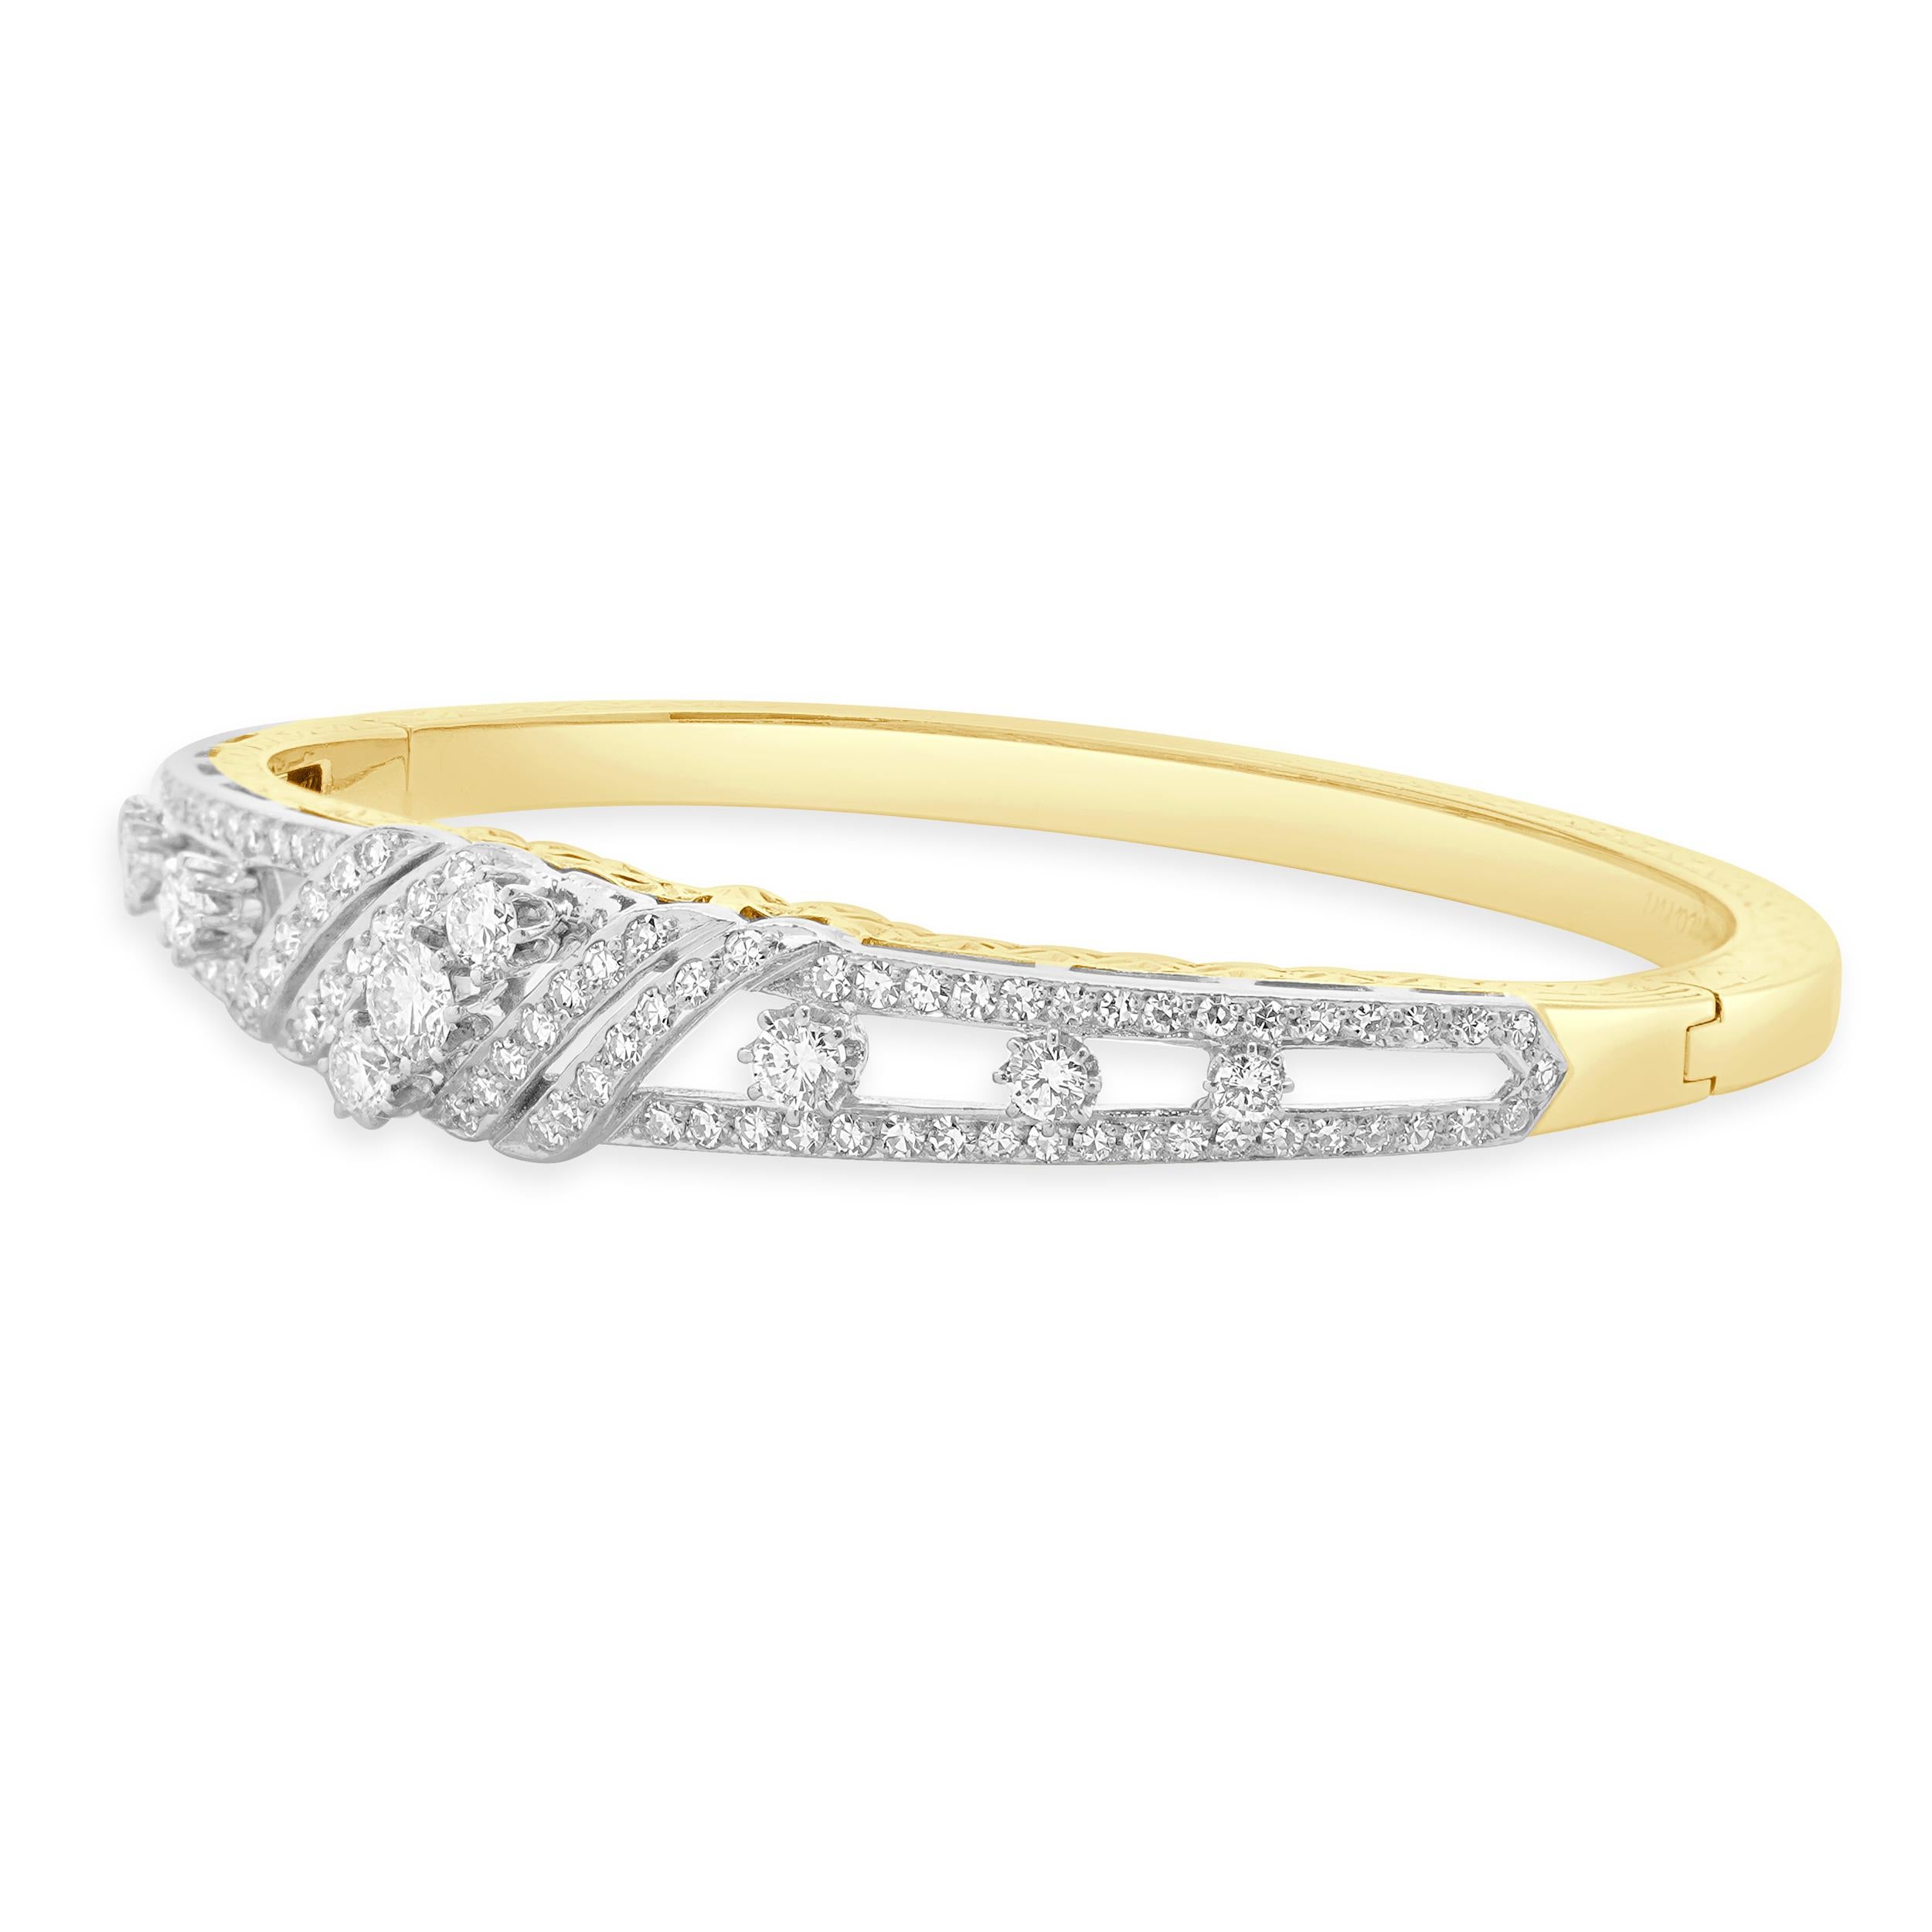 Designer: Spritzer & Furmann
Material: 14K yellow & white gold
Diamond: 107 round & single cut = 2.25cttw
Color: H/I
Clarity: VS2
Dimensions: bracelet will fit up to a 6.5-inch wrist
Weight: 22.16 grams